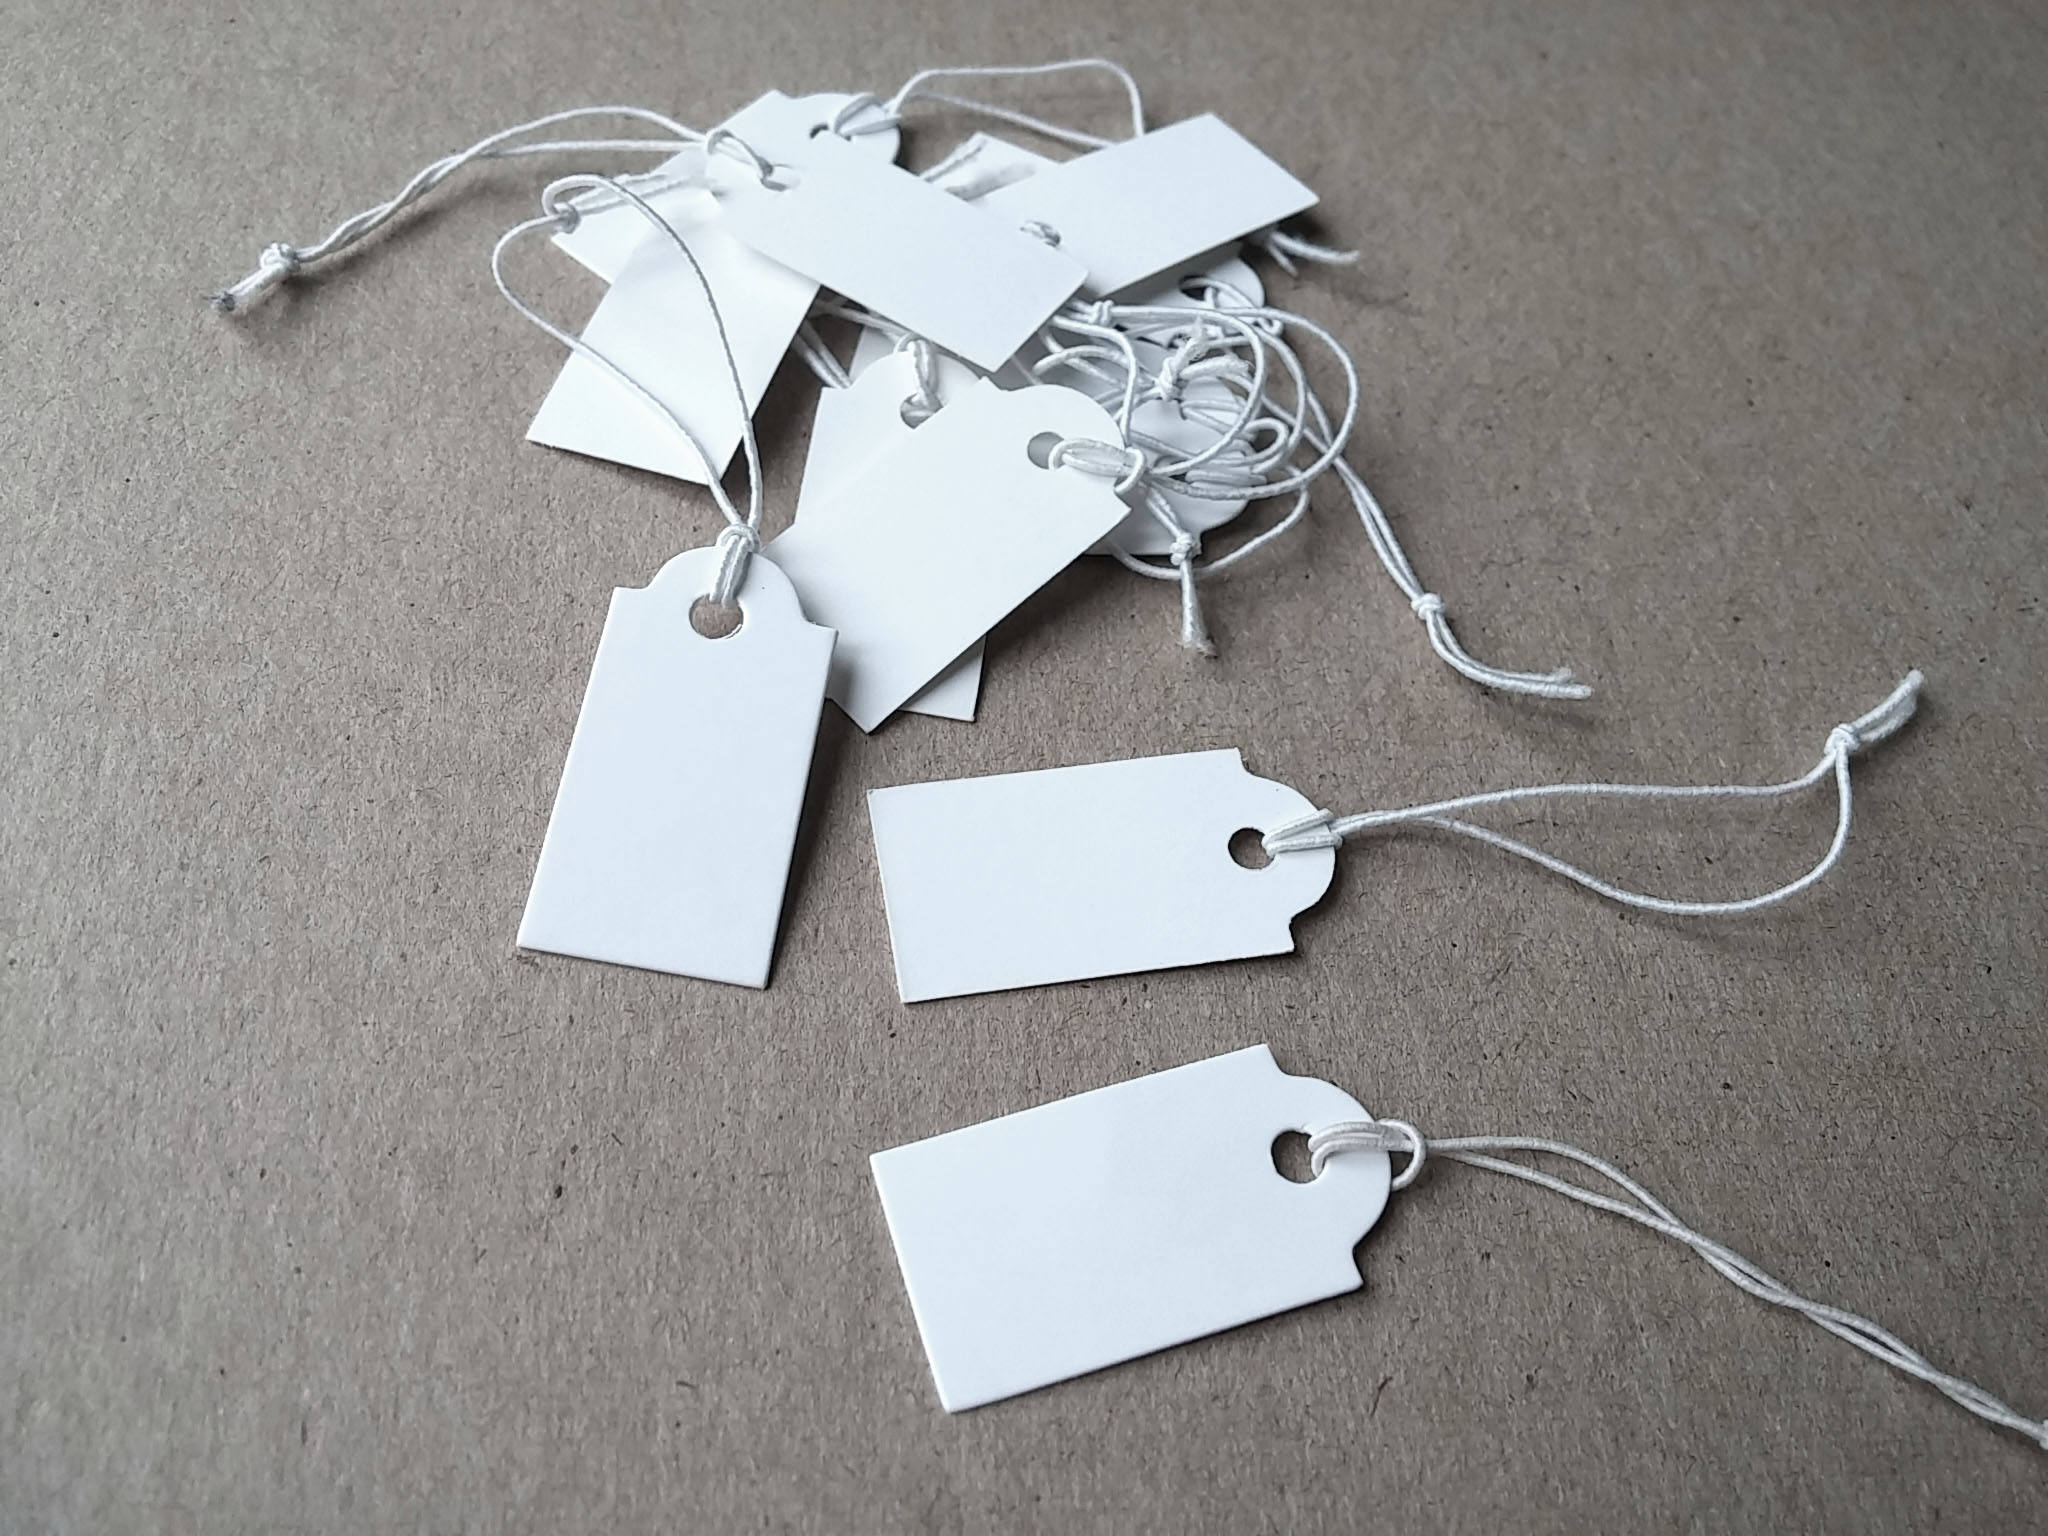 Not Returnable If Tag Is Removed White Jewelry Tag - 50 per Pack